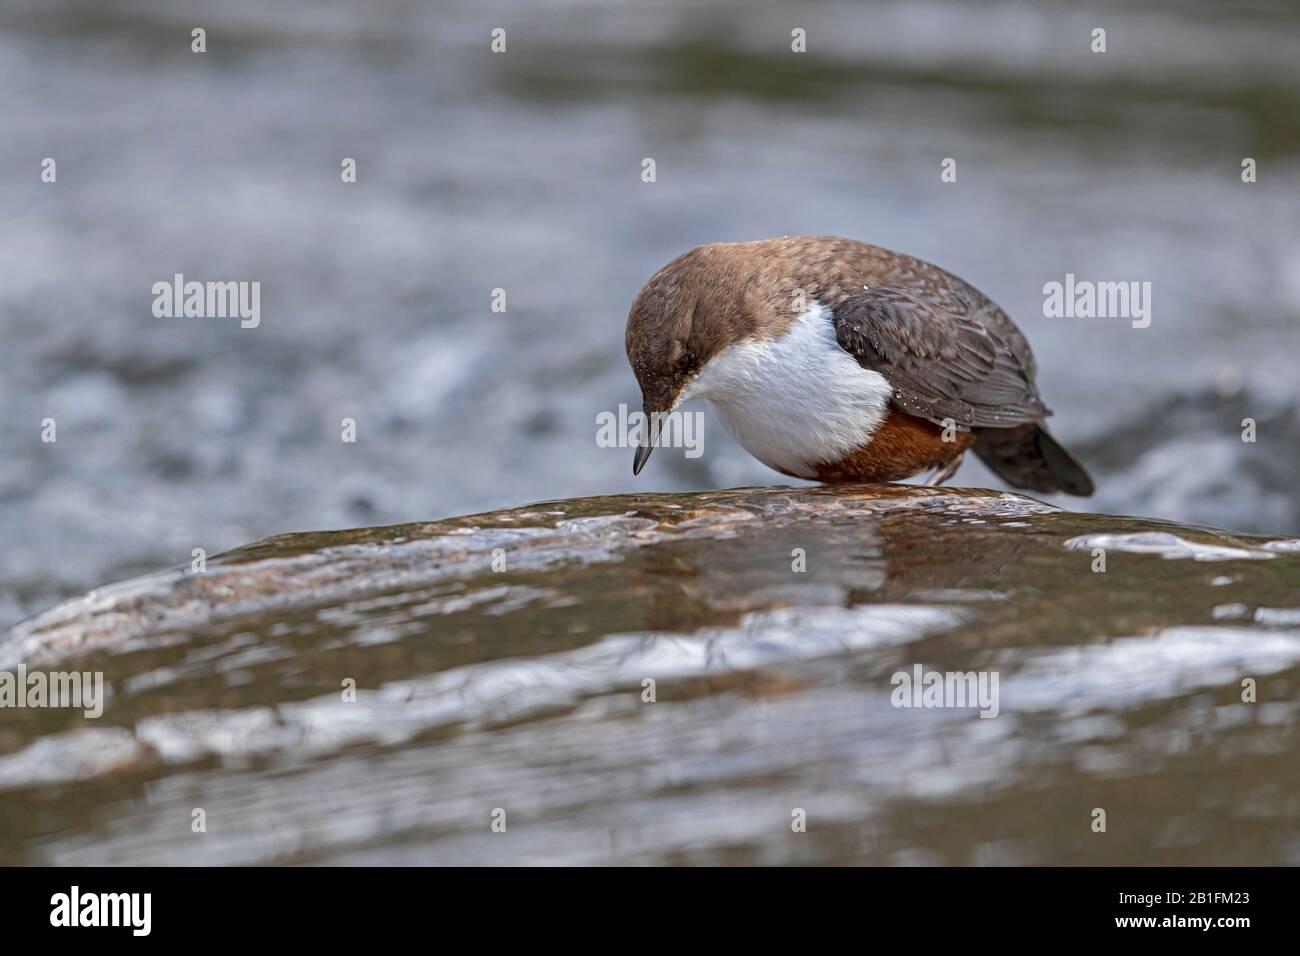 A White-throated Dipper (Cinclus cinclus) at ariver Stock Photo